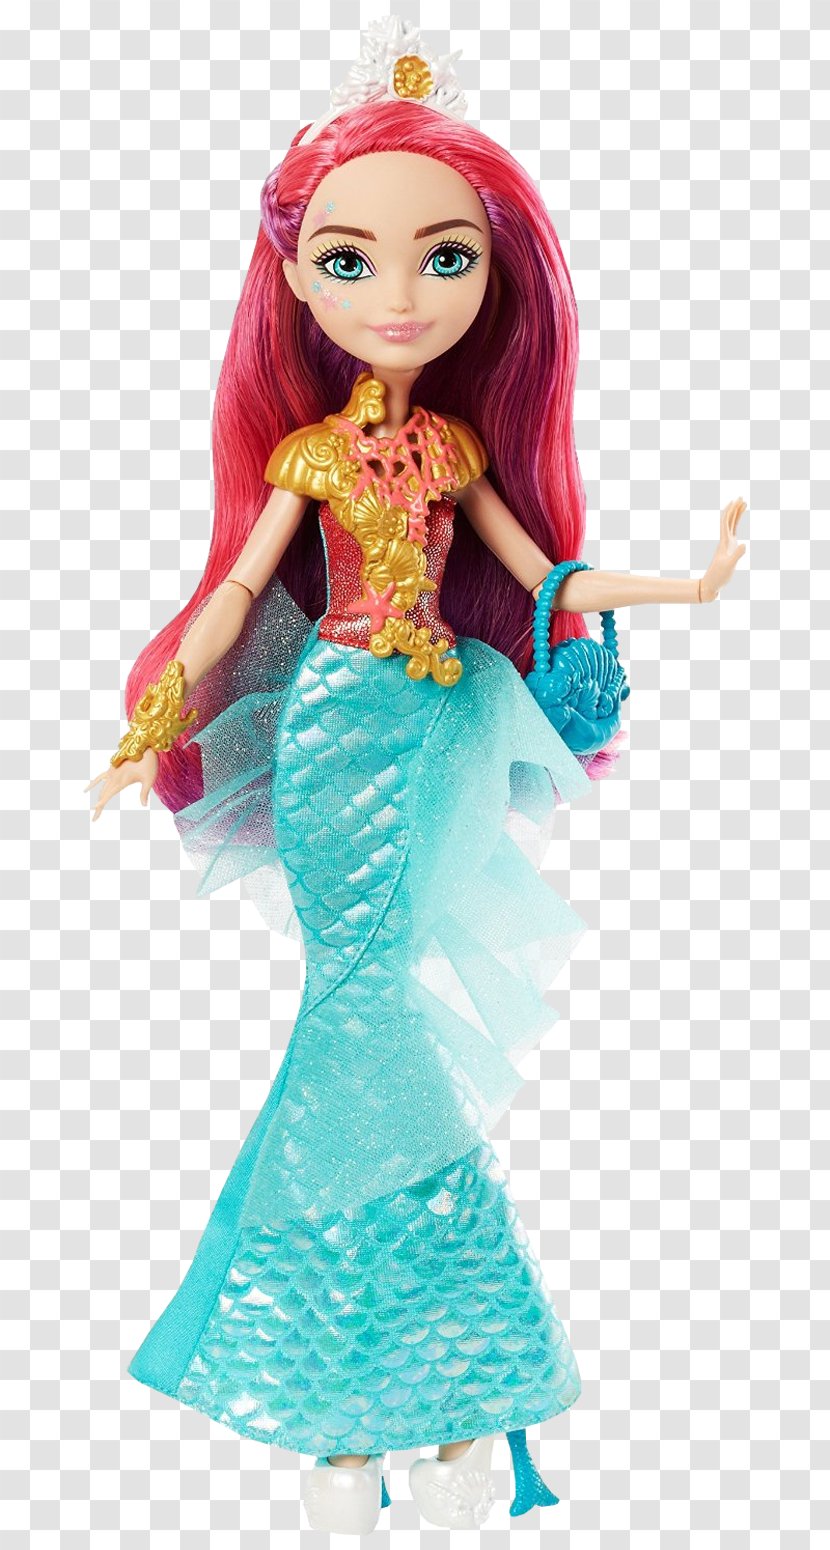 Ever After High Meeshell Mermaid Doll Amazon.com - Apple Transparent PNG